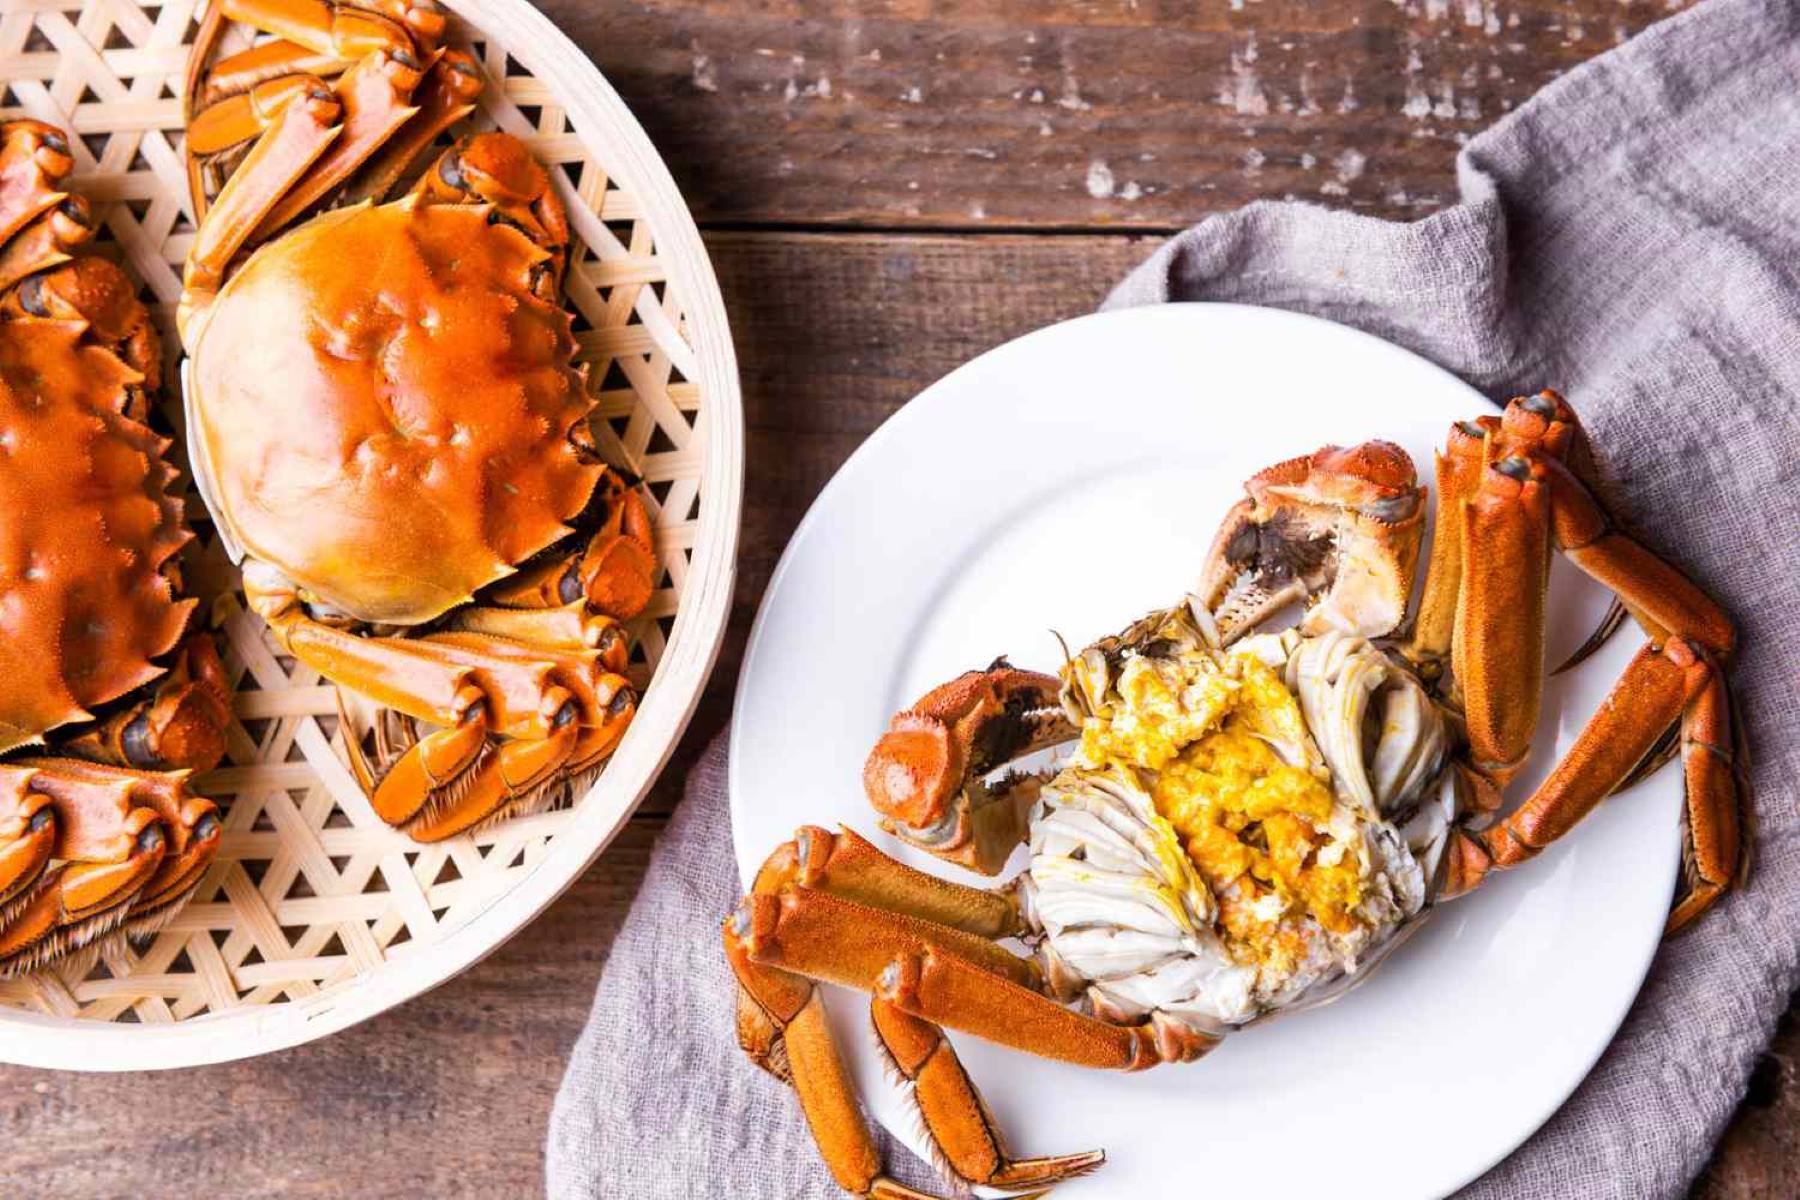 How To Store Crab After Cooking